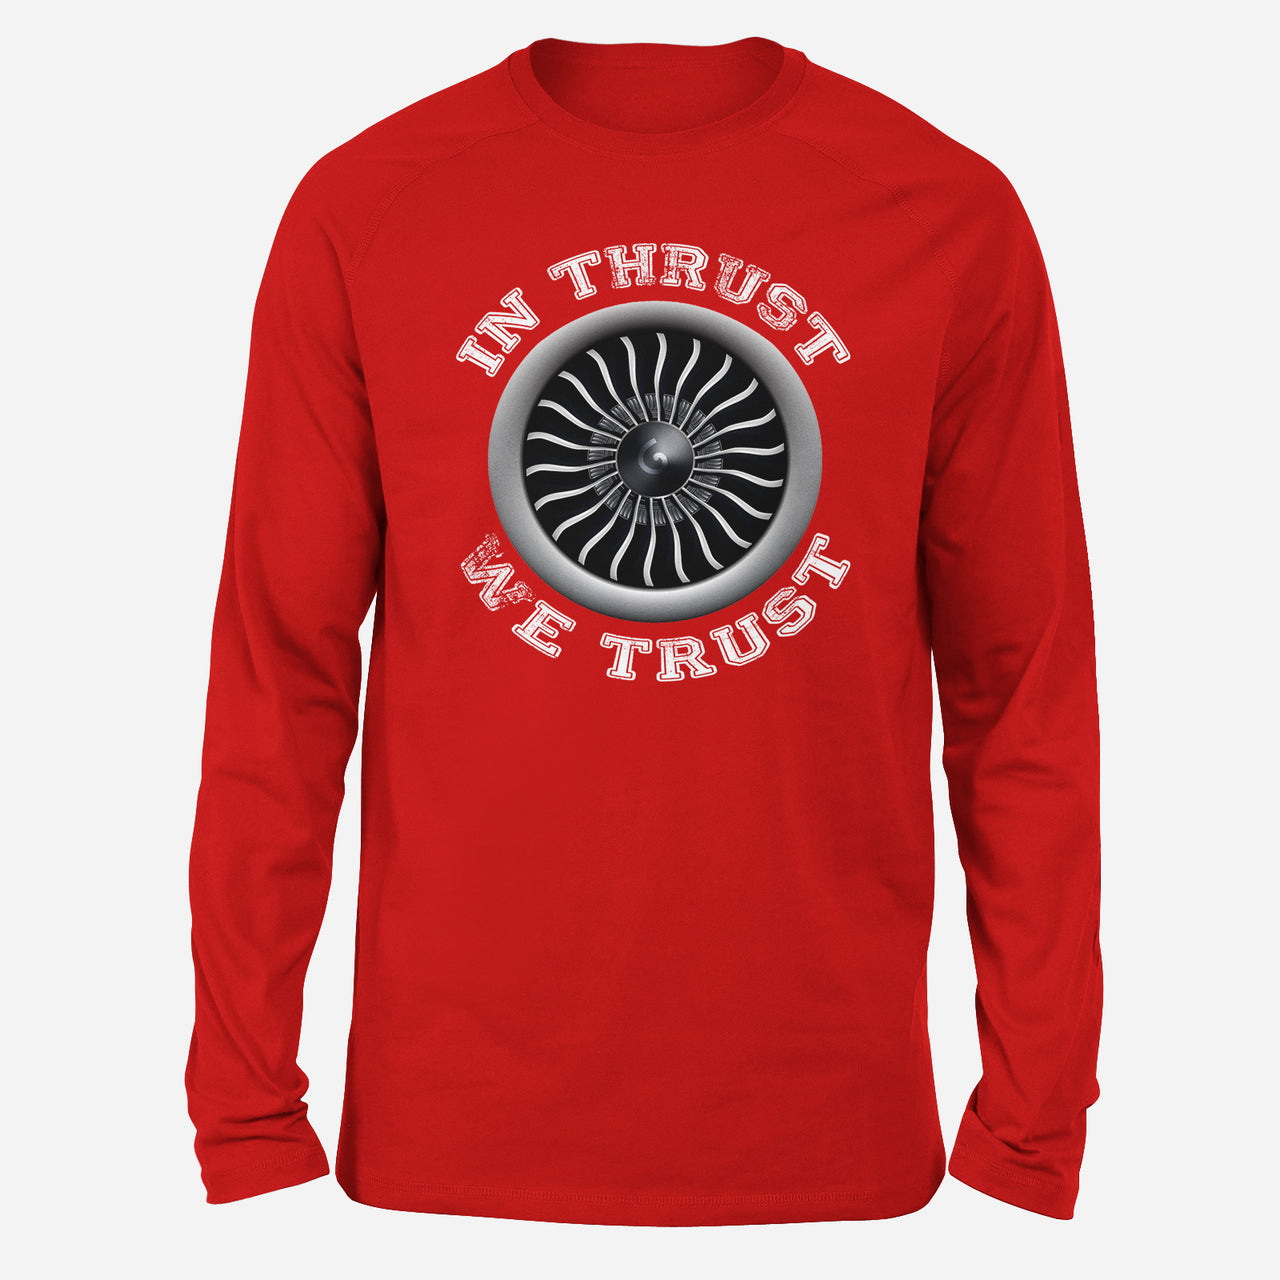 In Thrust We Trust (Vol 2) Designed Long-Sleeve T-Shirts